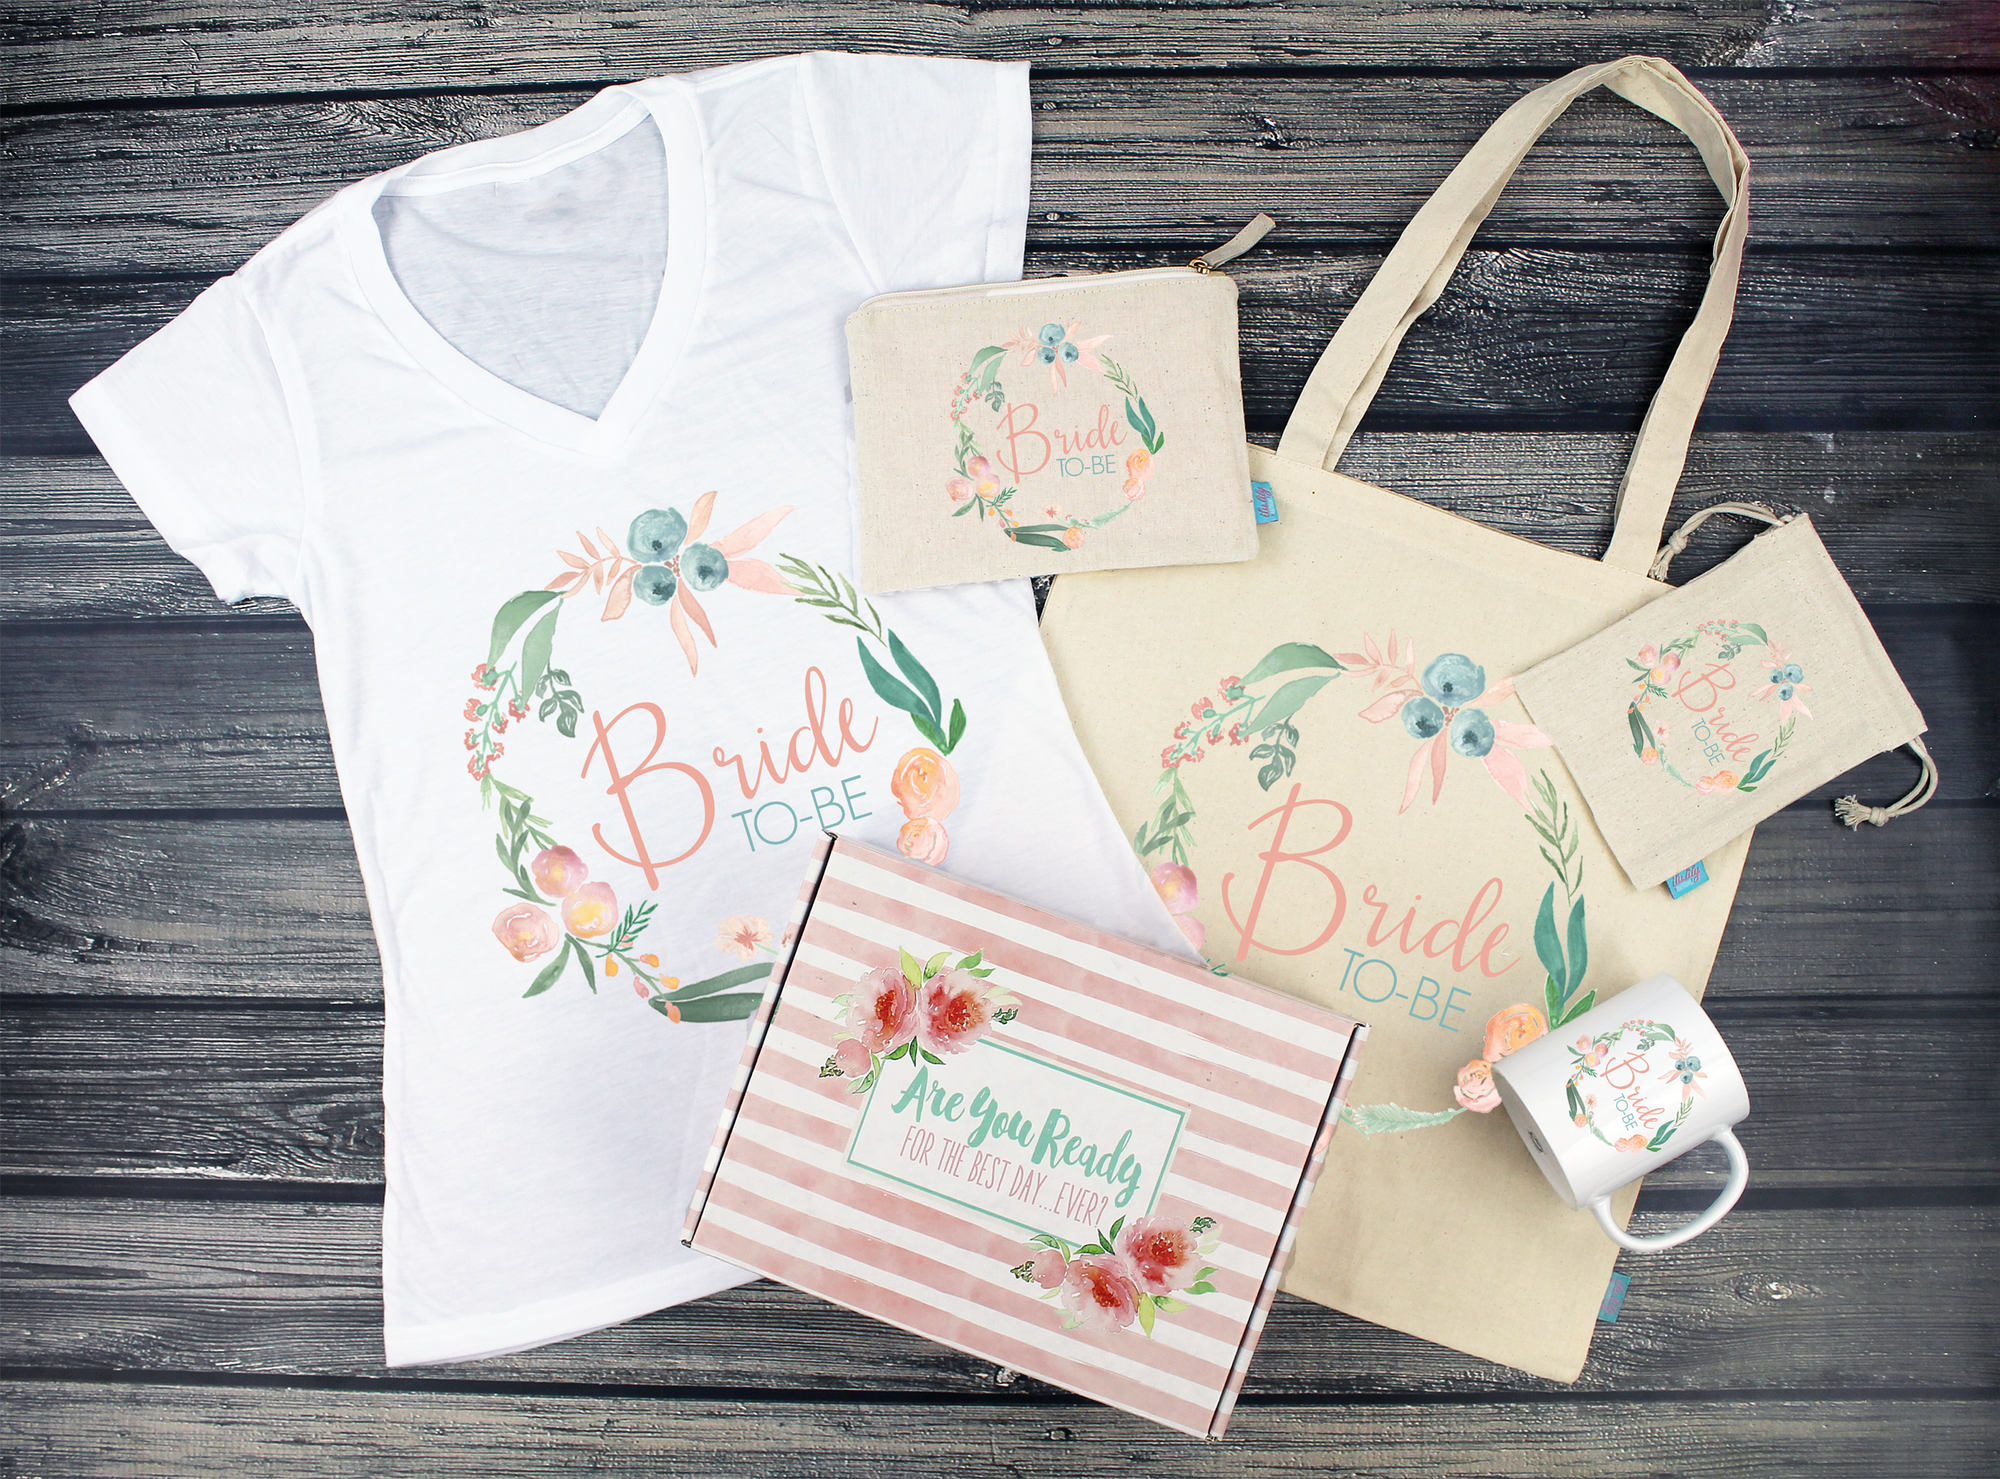 Bride to Be Gift Box | Bride to Be Gift | Floral Wreath